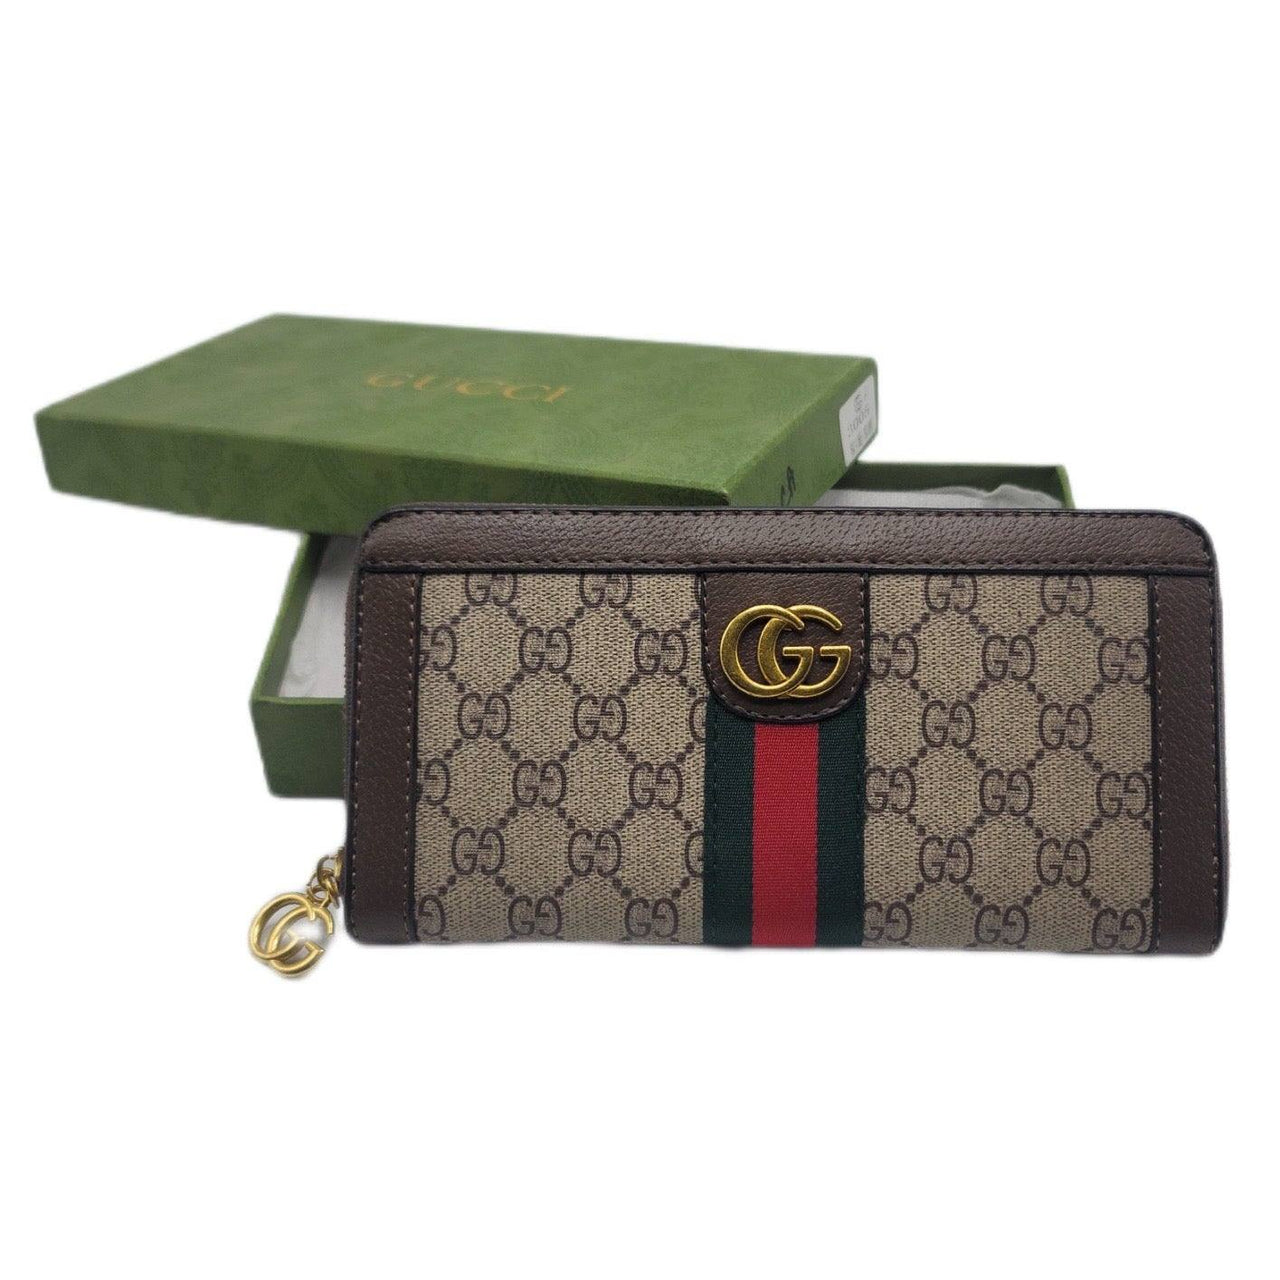 The Bag Couture Luggage & Bags Gucci Zip Wallet Classic Brown